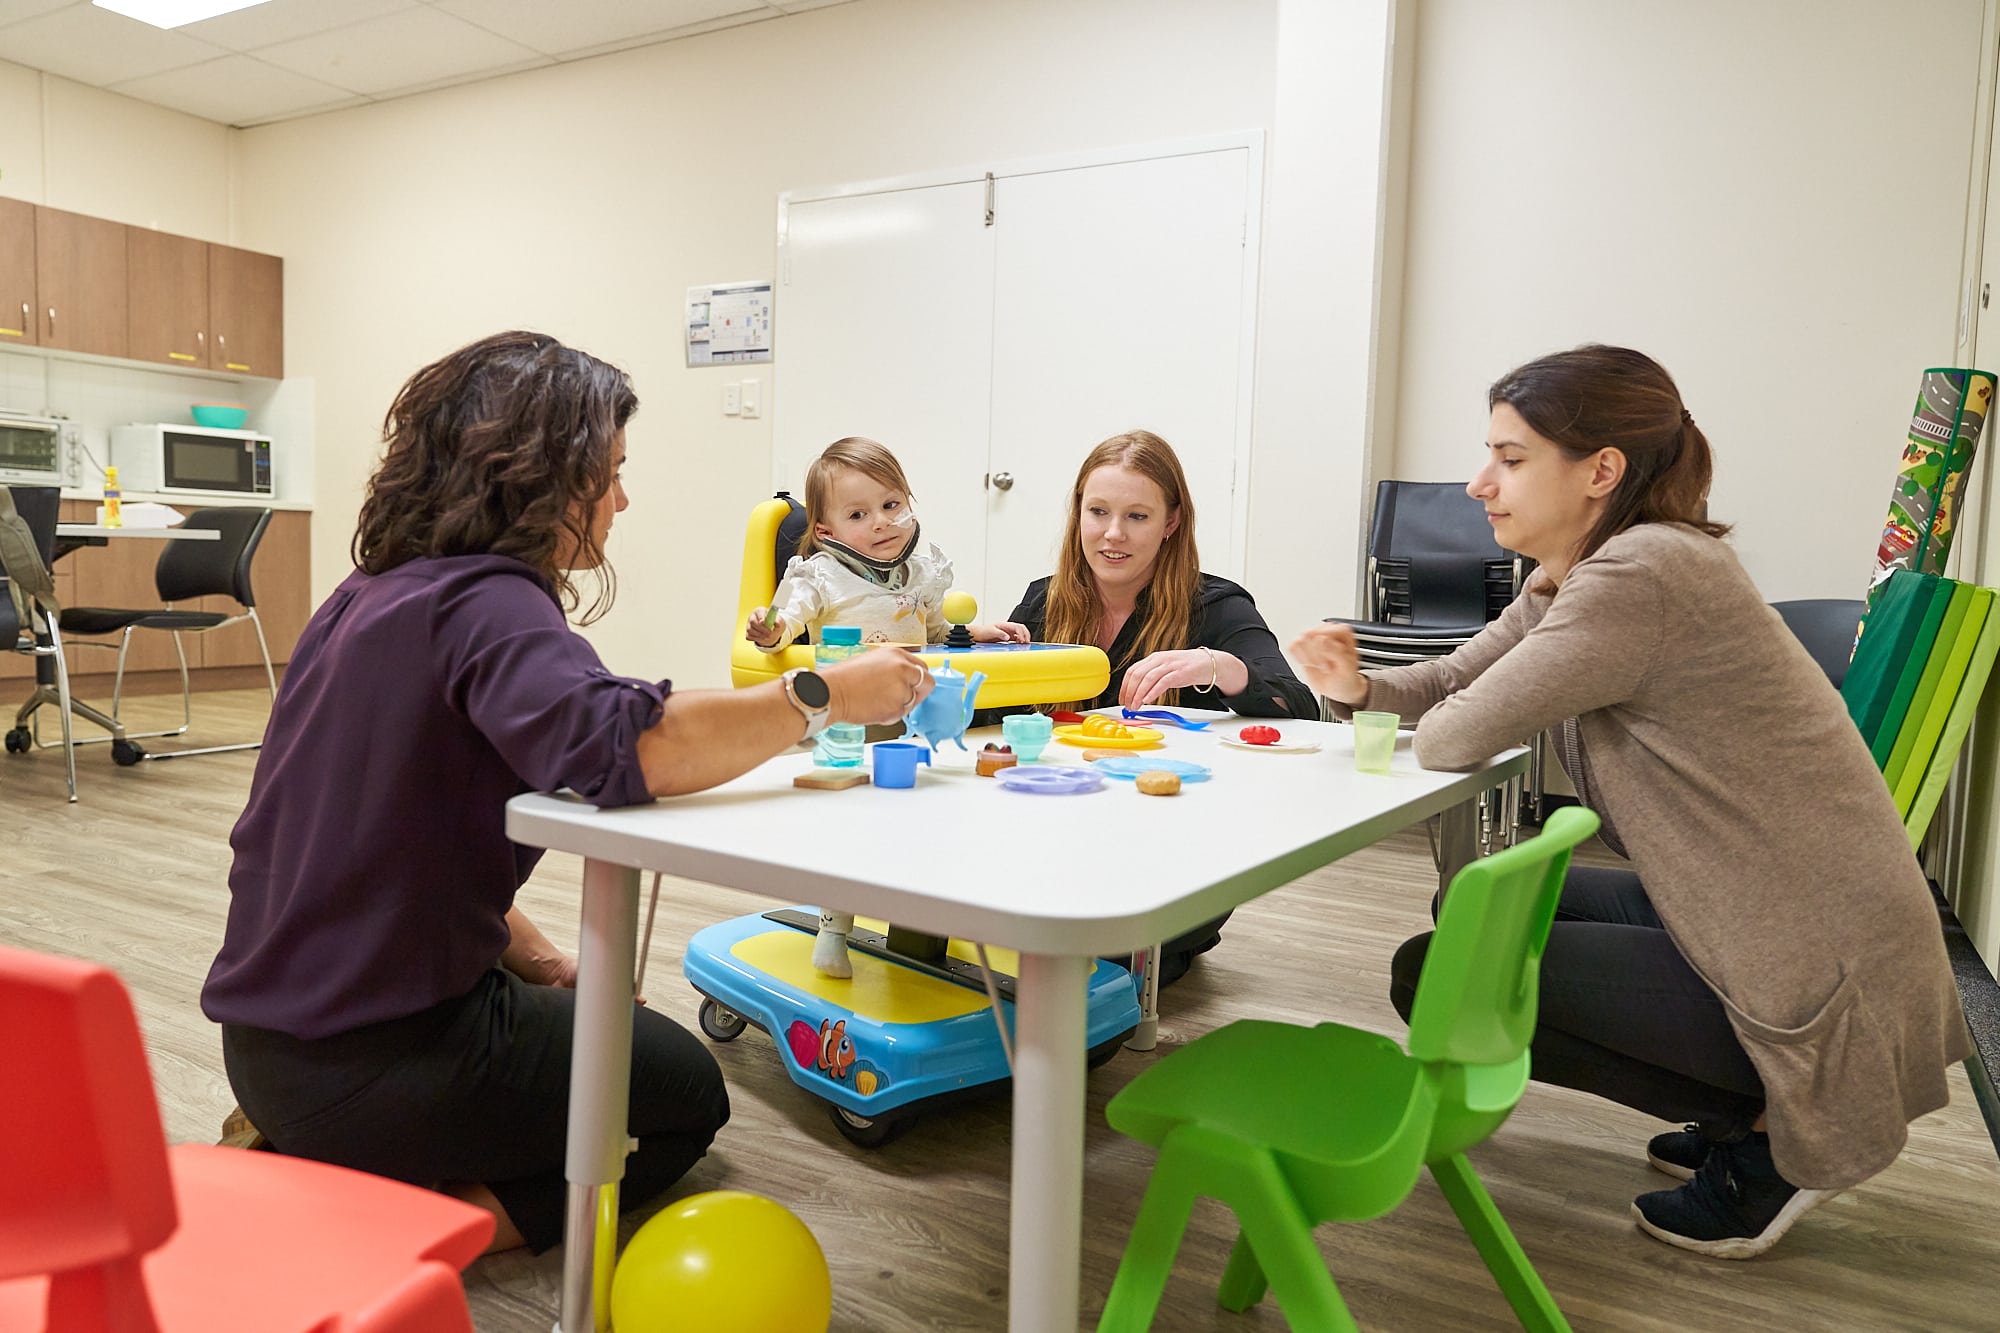 A therapist supports a young child as she engages in play. They are sitting at an activity table with two other women. They are playing with a teapot and cup set. 